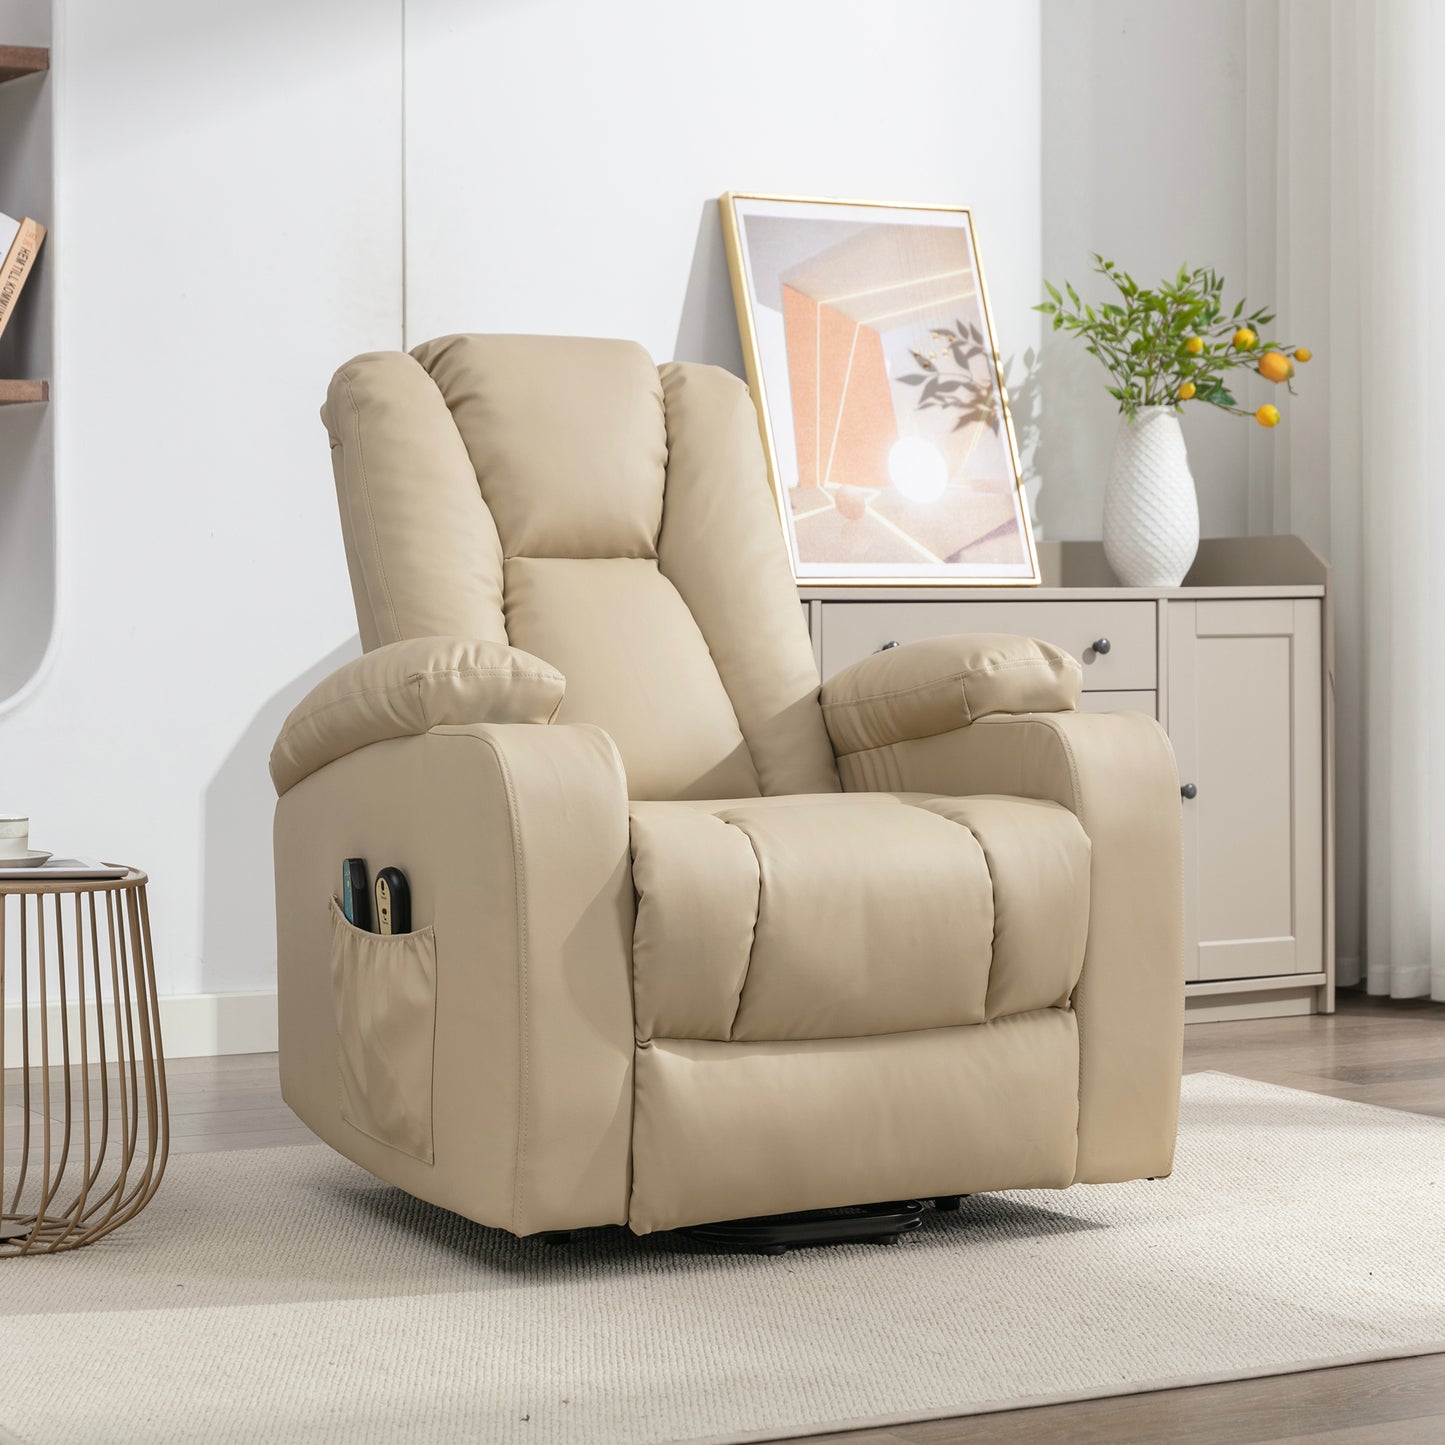 Saxham electric riser recliner with massage and heat